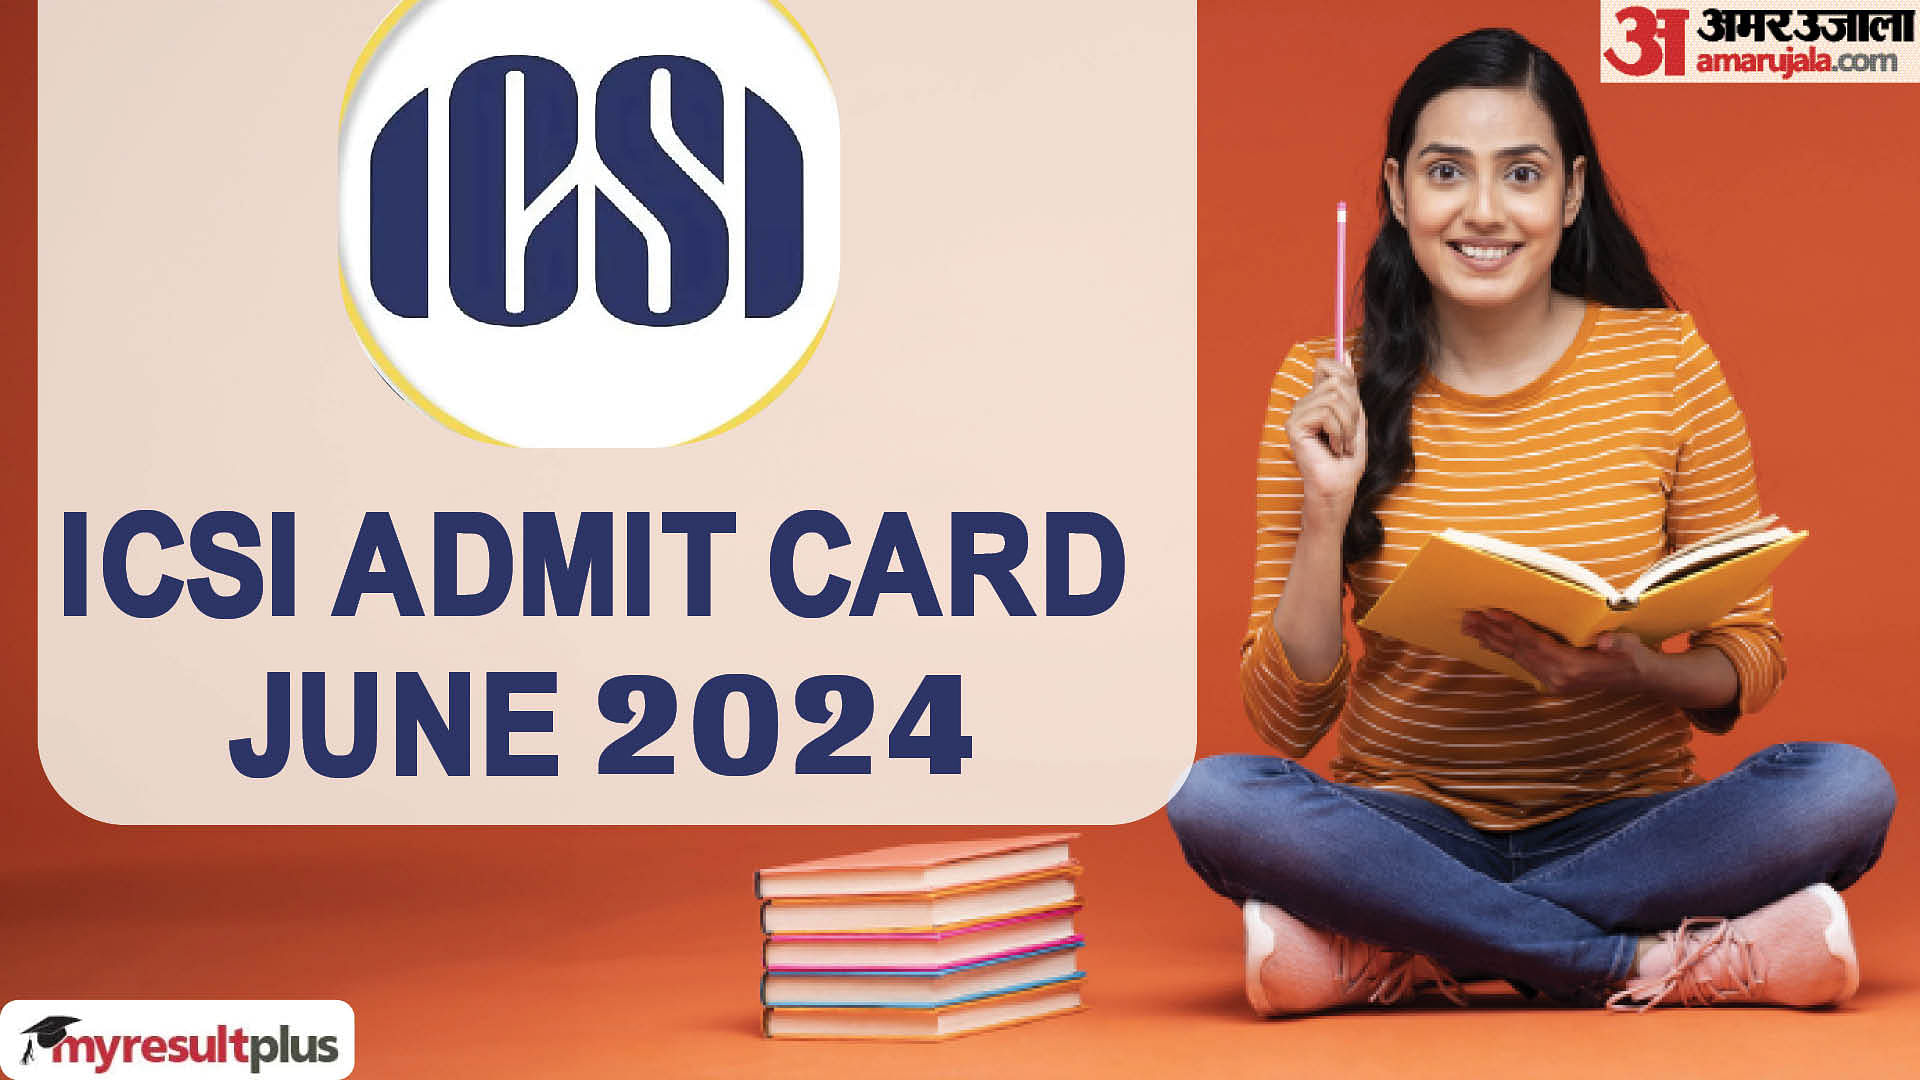 ICSI Admit Card June 2024 out now, Read the official notice and steps to download hall ticket here